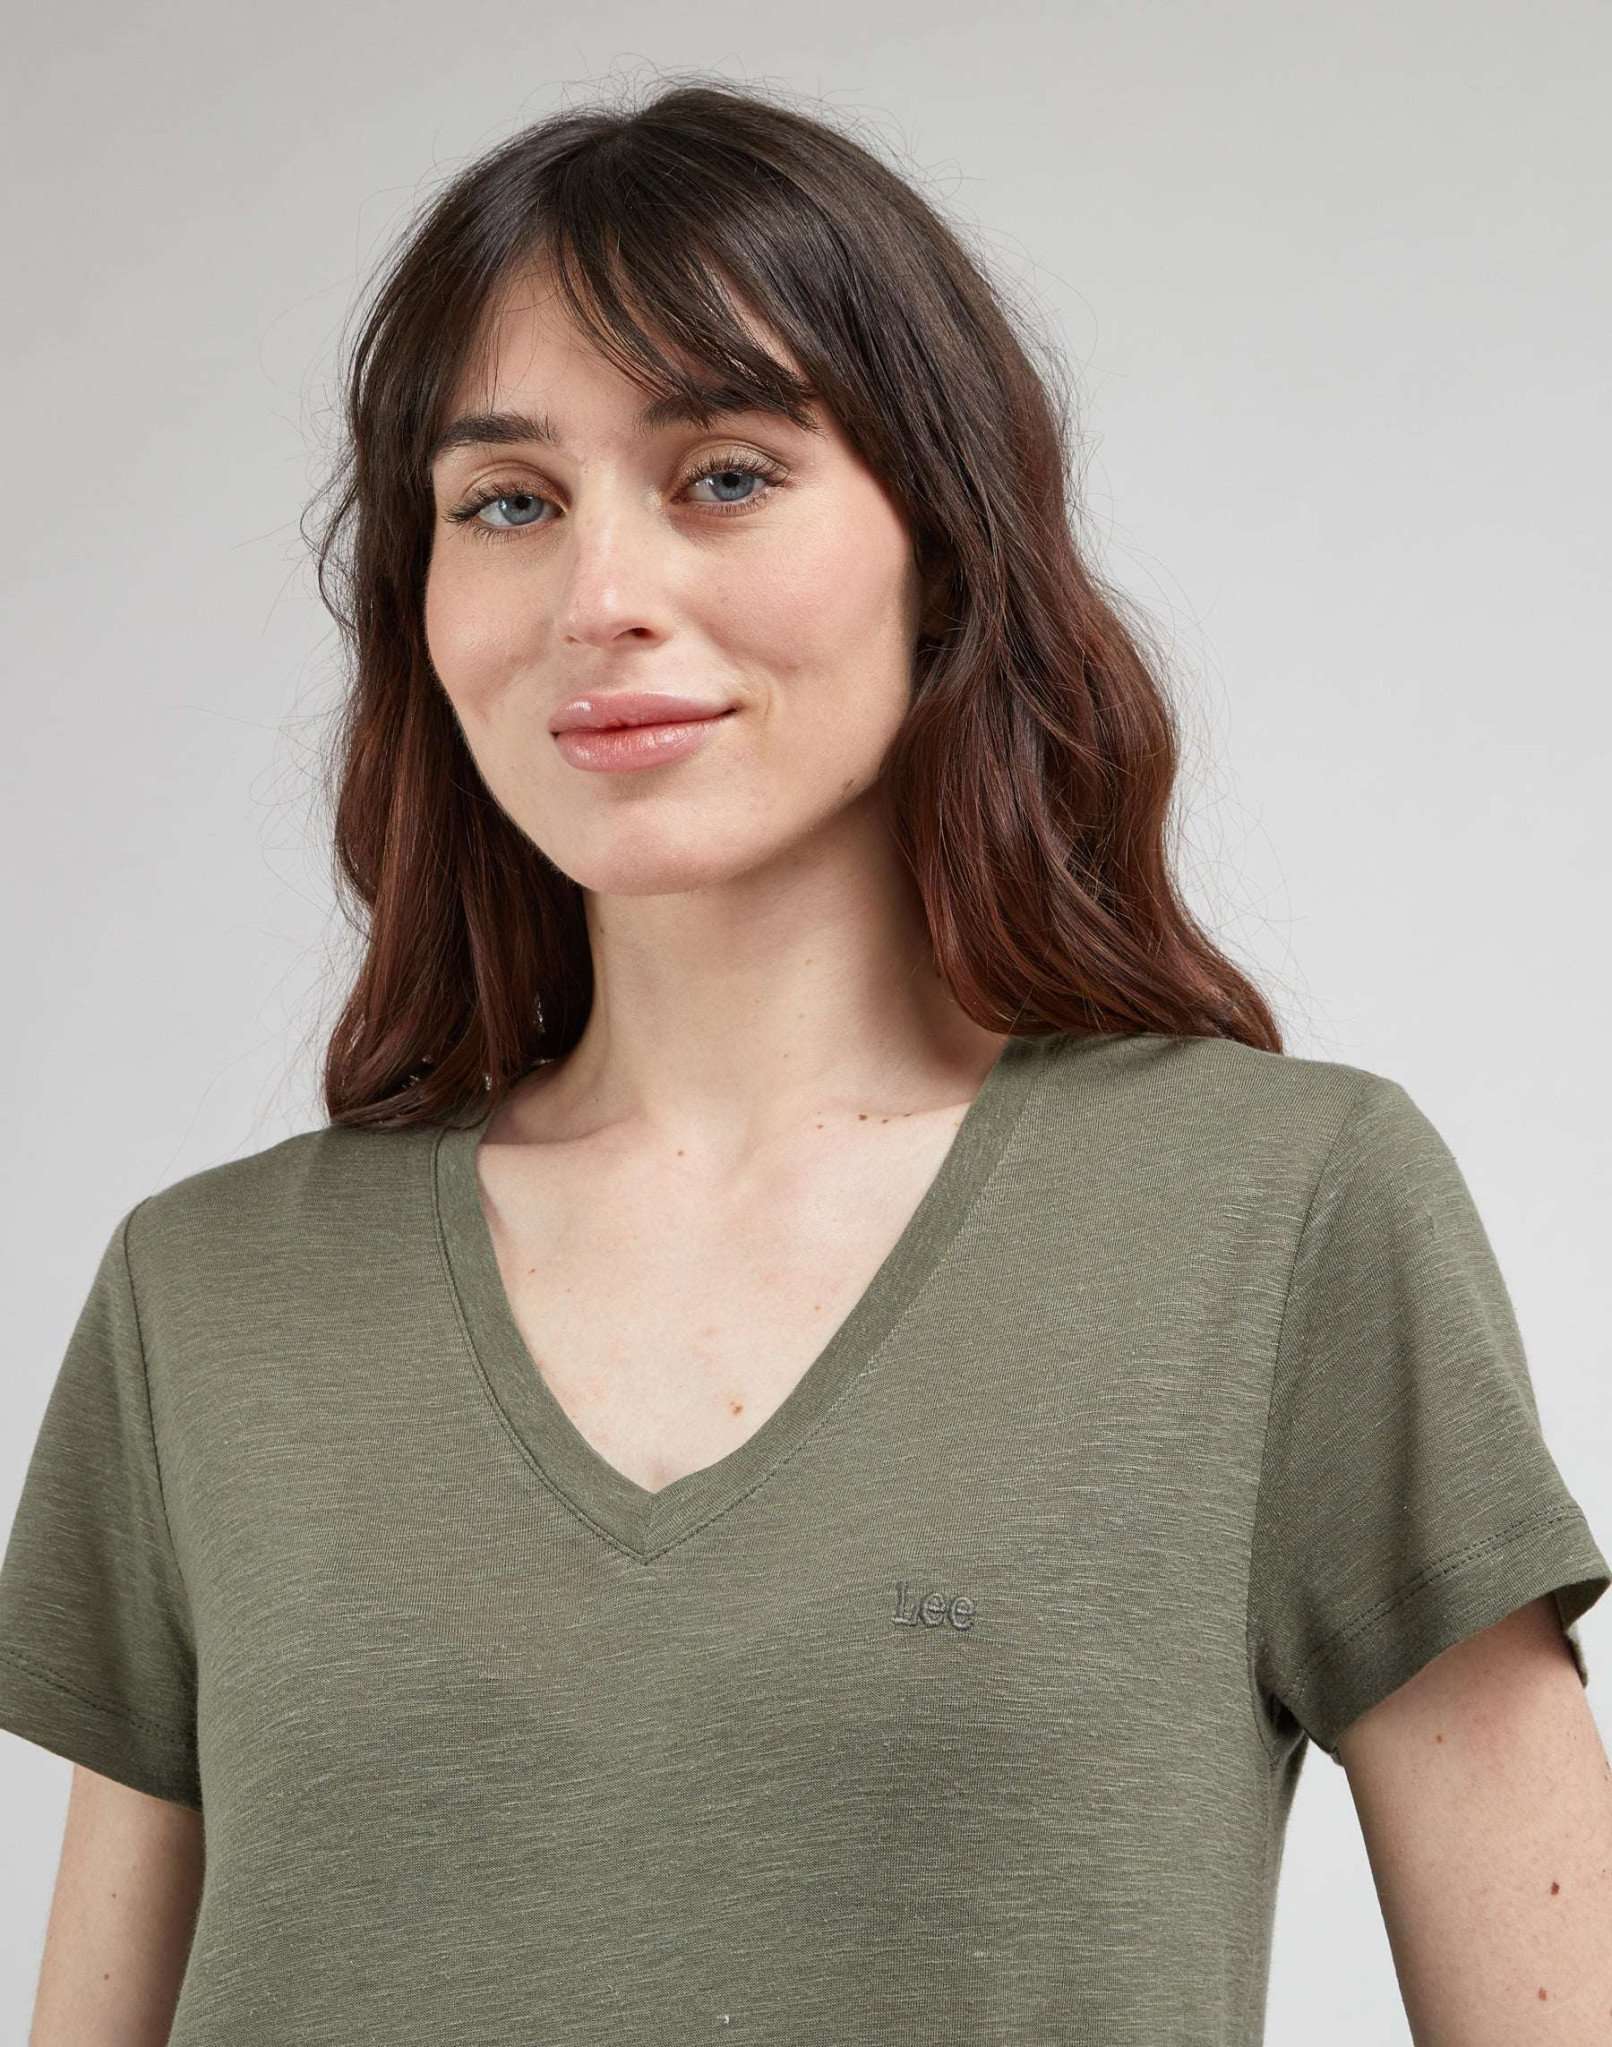 V Neck Tee in Olive Grove T-Shirts Lee   